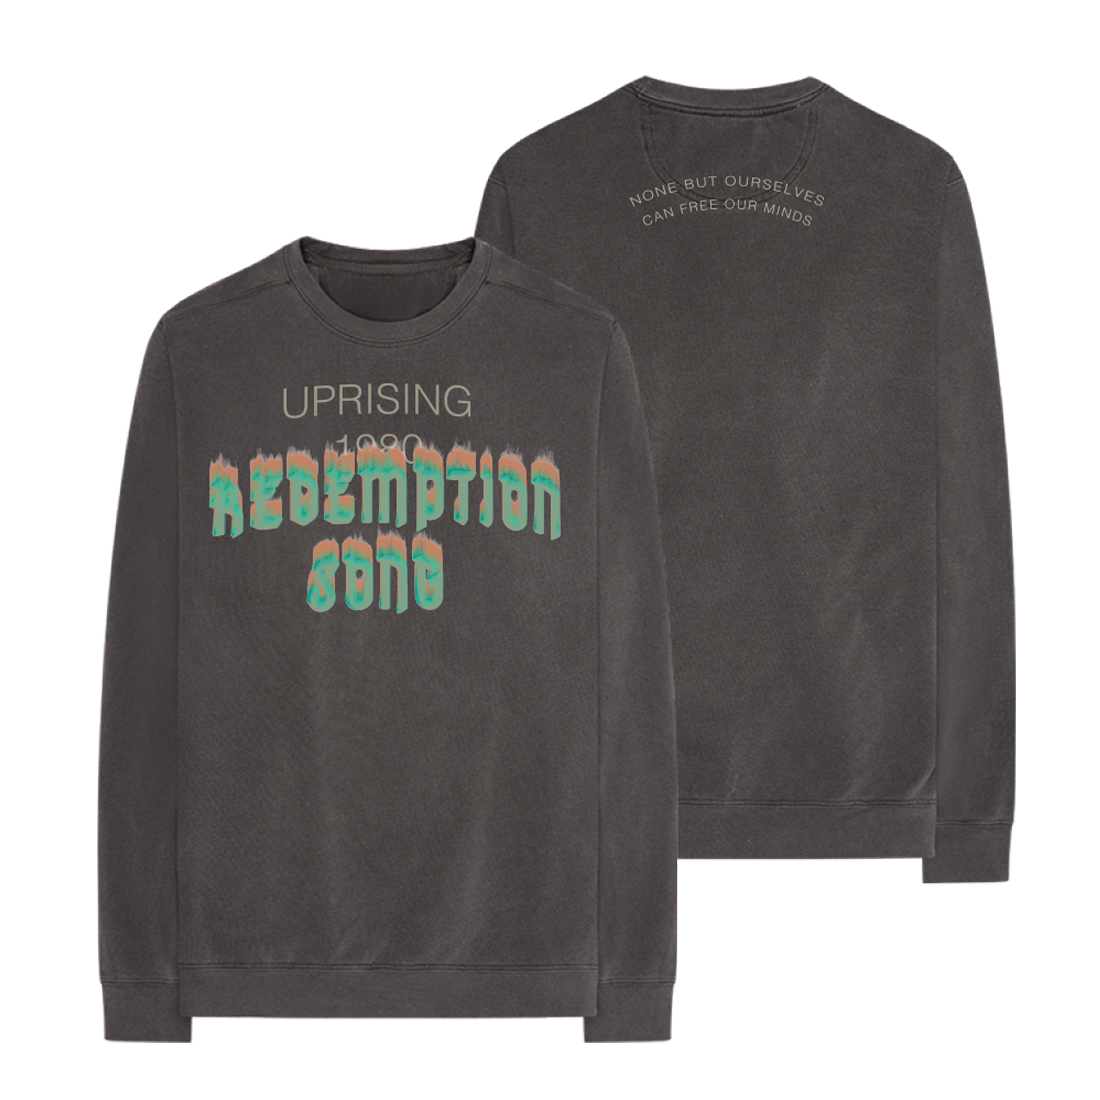 Bob Marley - Redemption Song Long Sleeve Crew